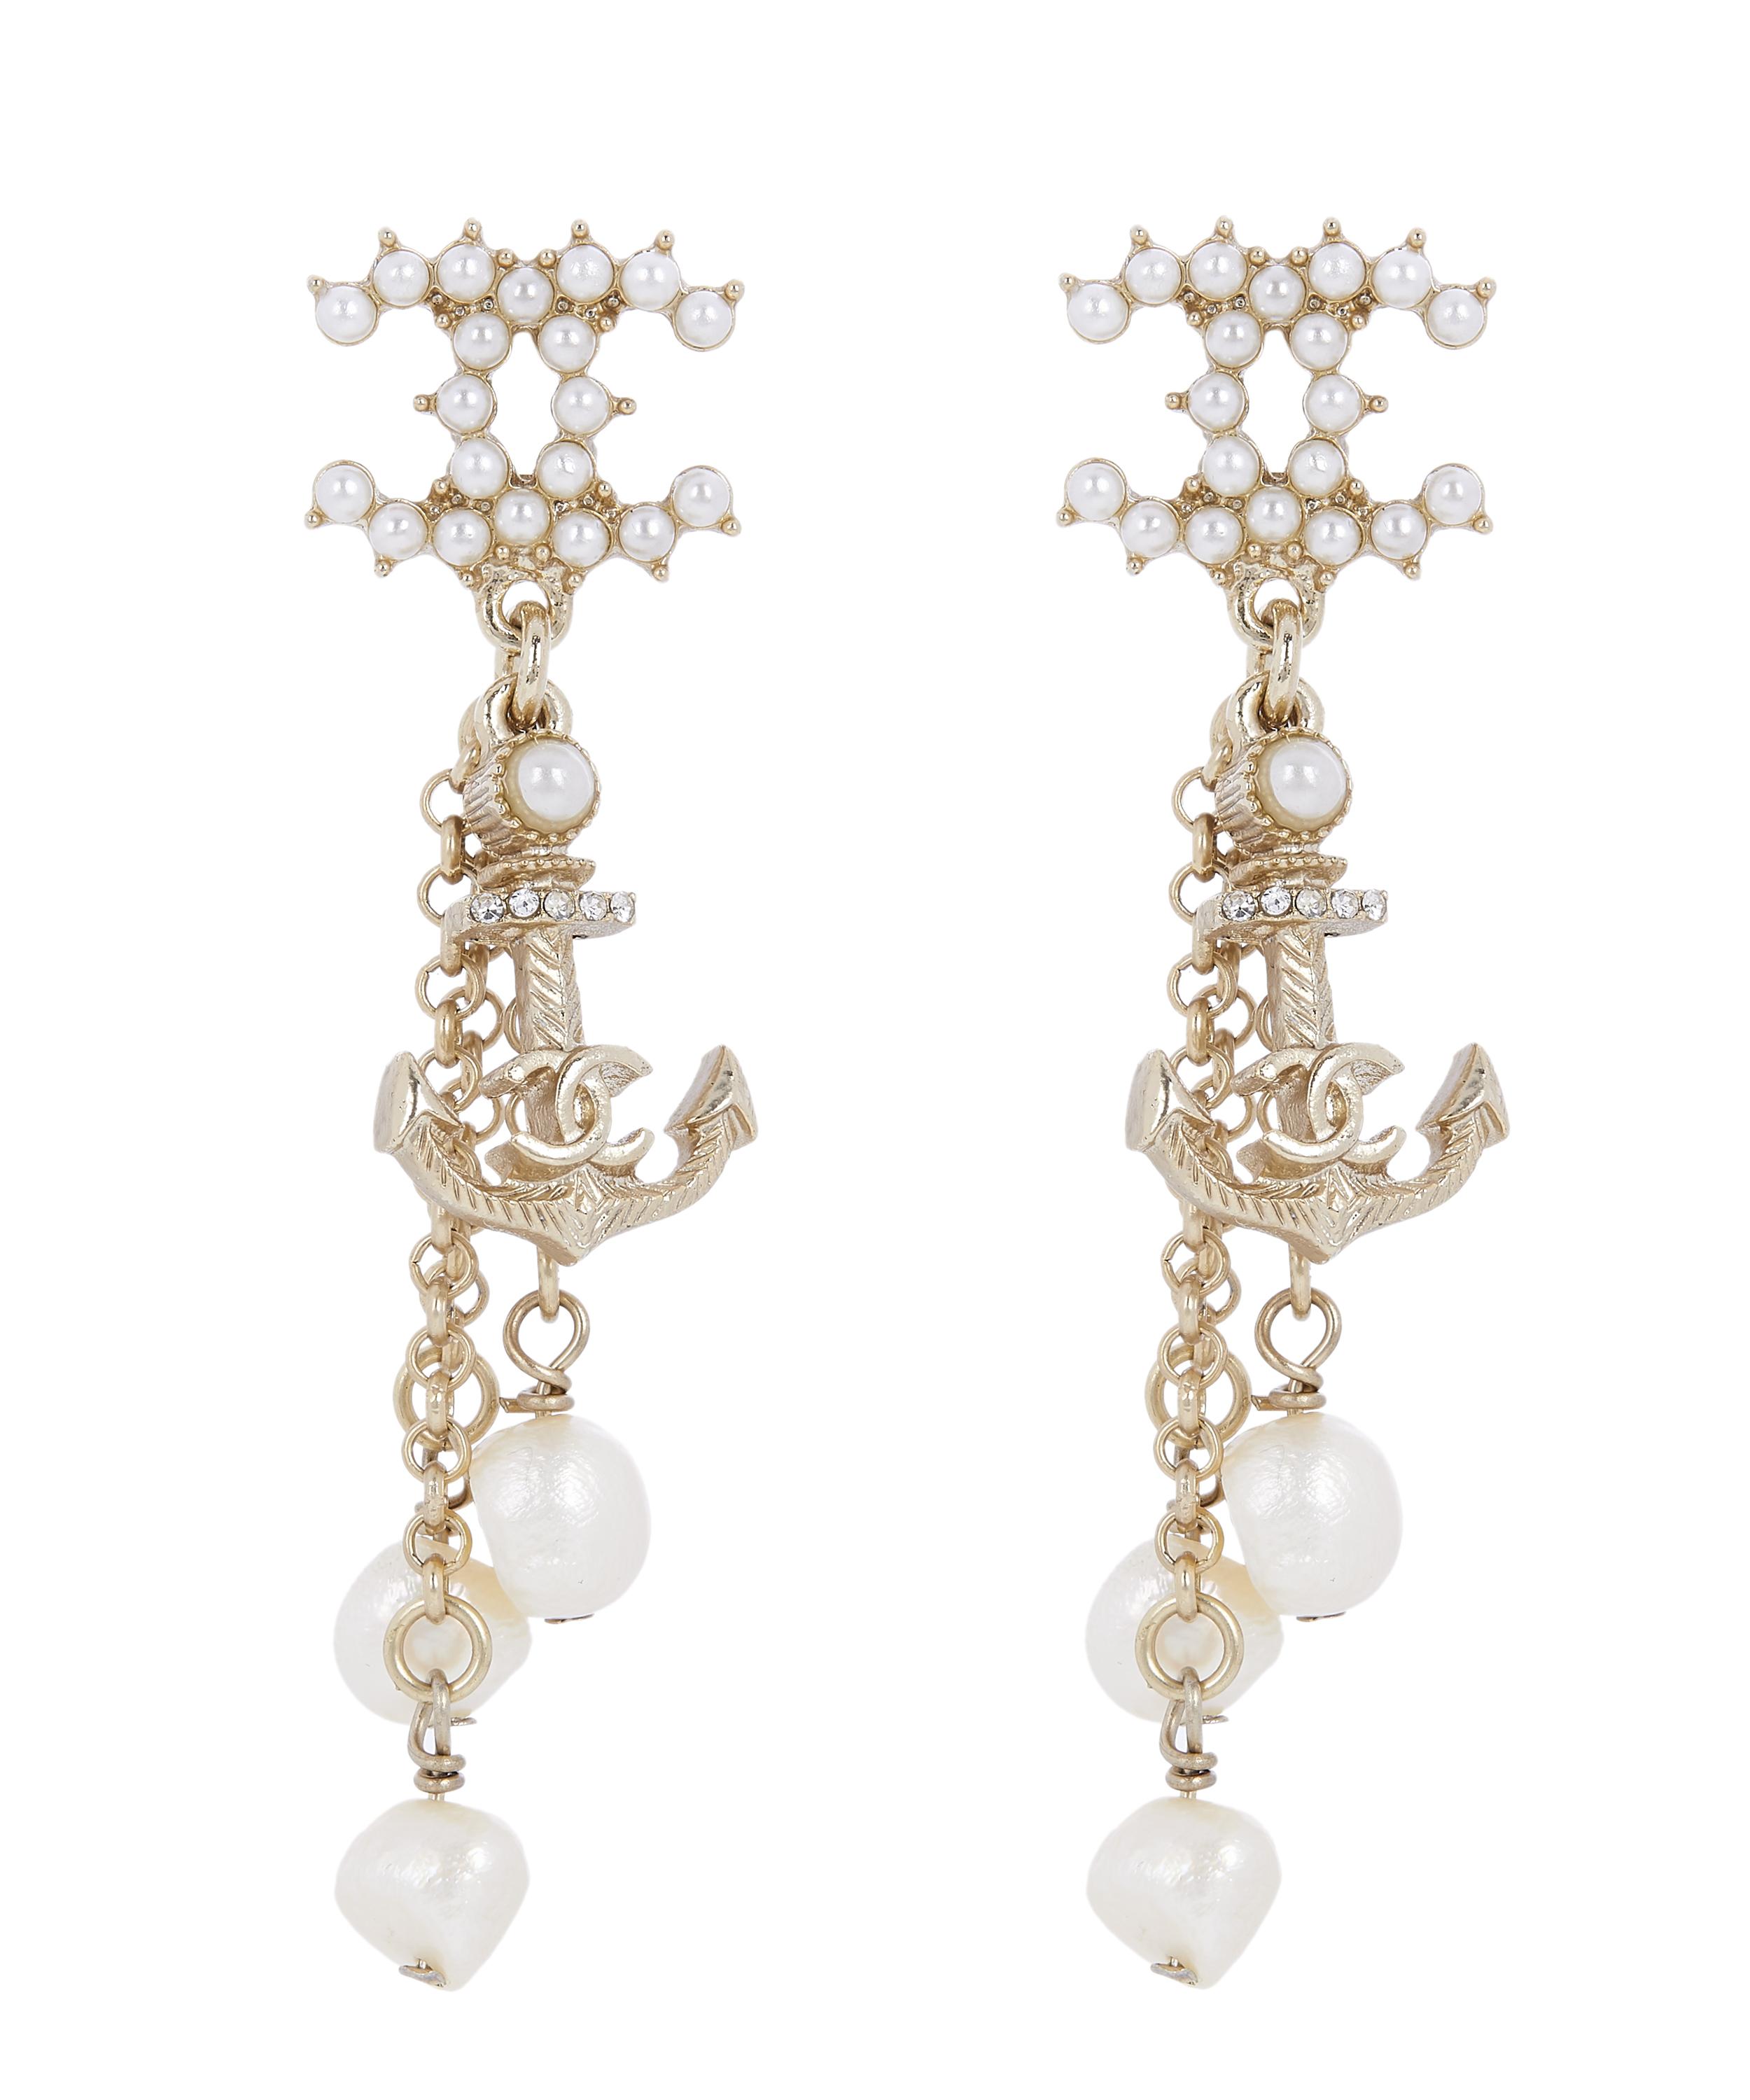 Turn Of The Century Chanel Gilt Faux Pearl Drop Earrings Liberty